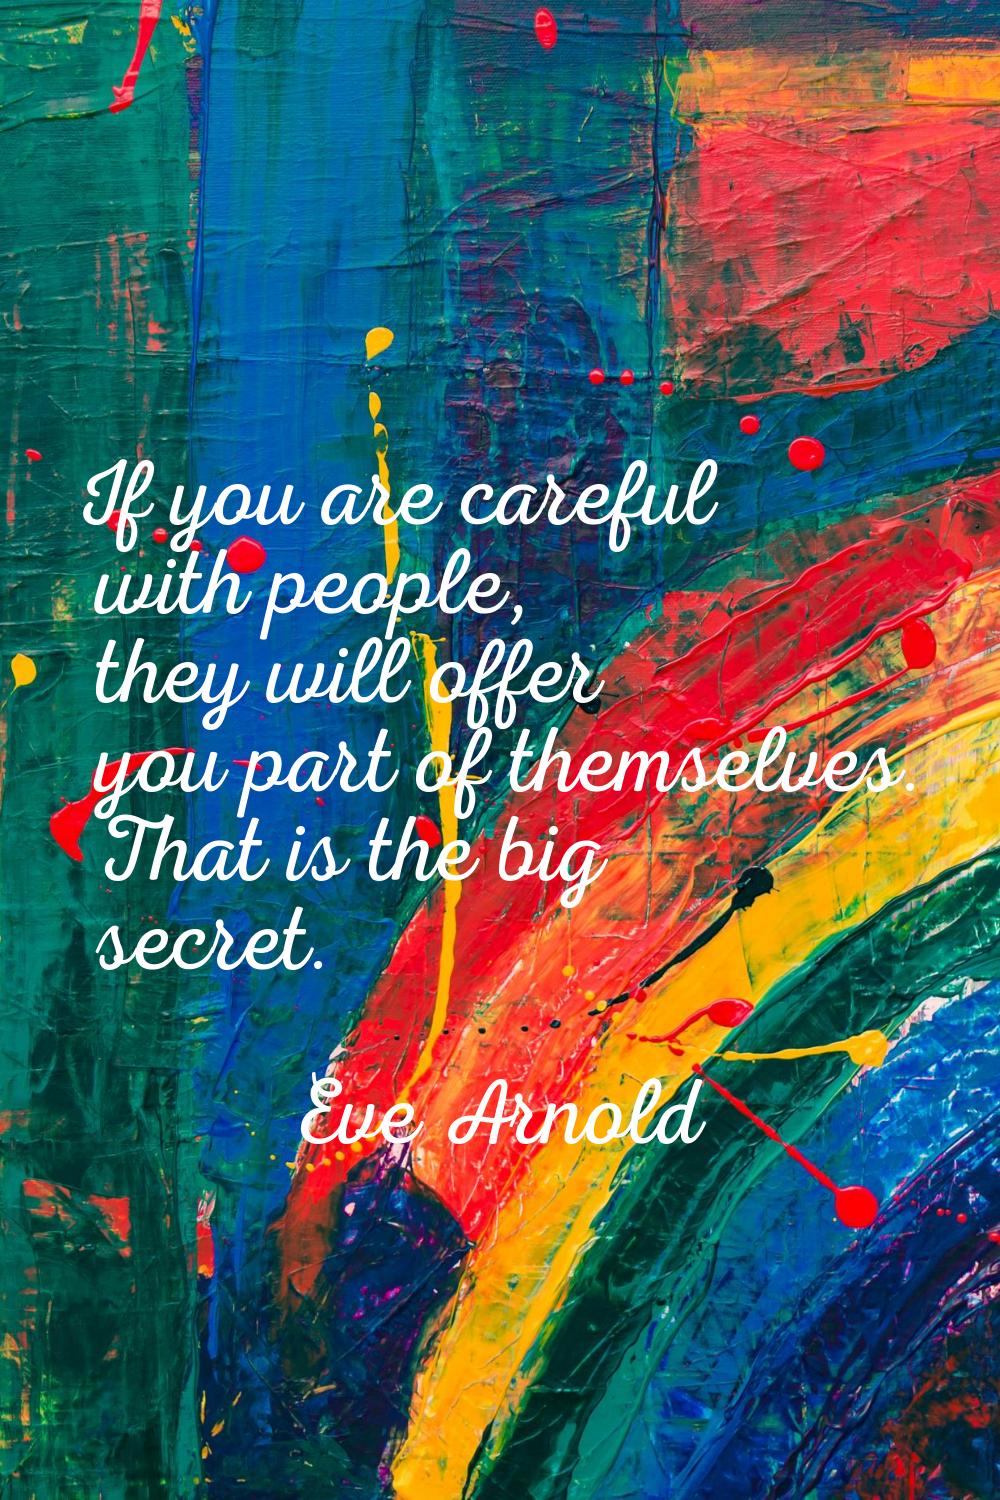 If you are careful with people, they will offer you part of themselves. That is the big secret.